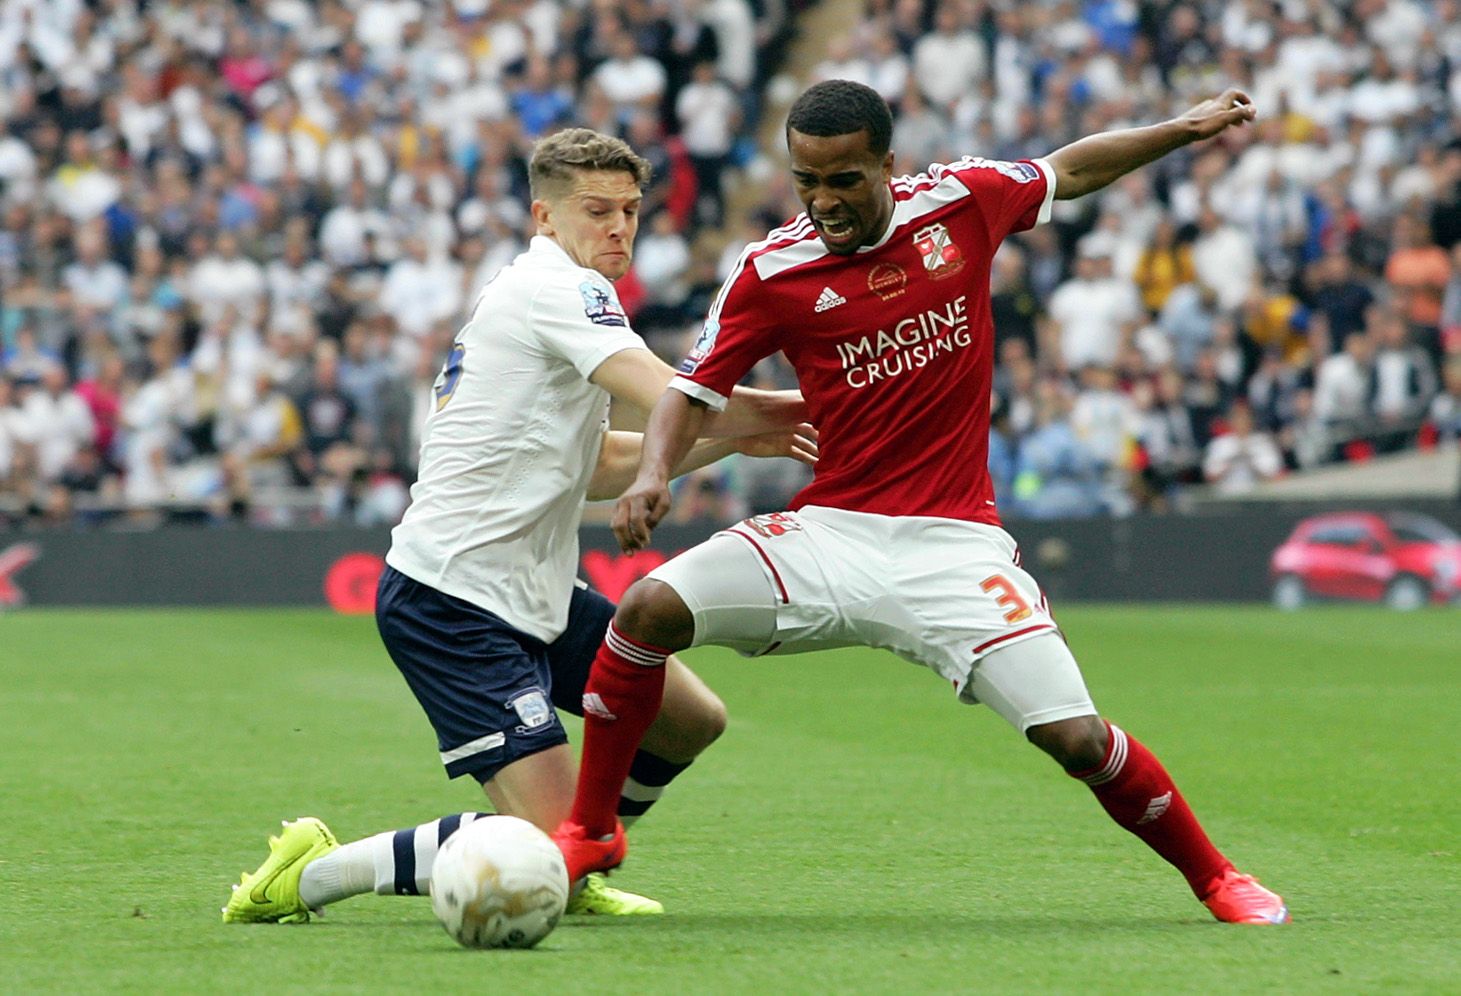 Football - Preston North End v Swindon Town - Sky Bet Football League One Play-Off Final - Wembley Stadium - 24/5/15 
Swindon's Nathan Byrne in action with Preston North End's Calum Woods 
Mandatory Credit: Action Images / David Field 
Livepic 
EDITORIAL USE ONLY. No use with unauthorized audio, video, data, fixture lists, club/league logos or 